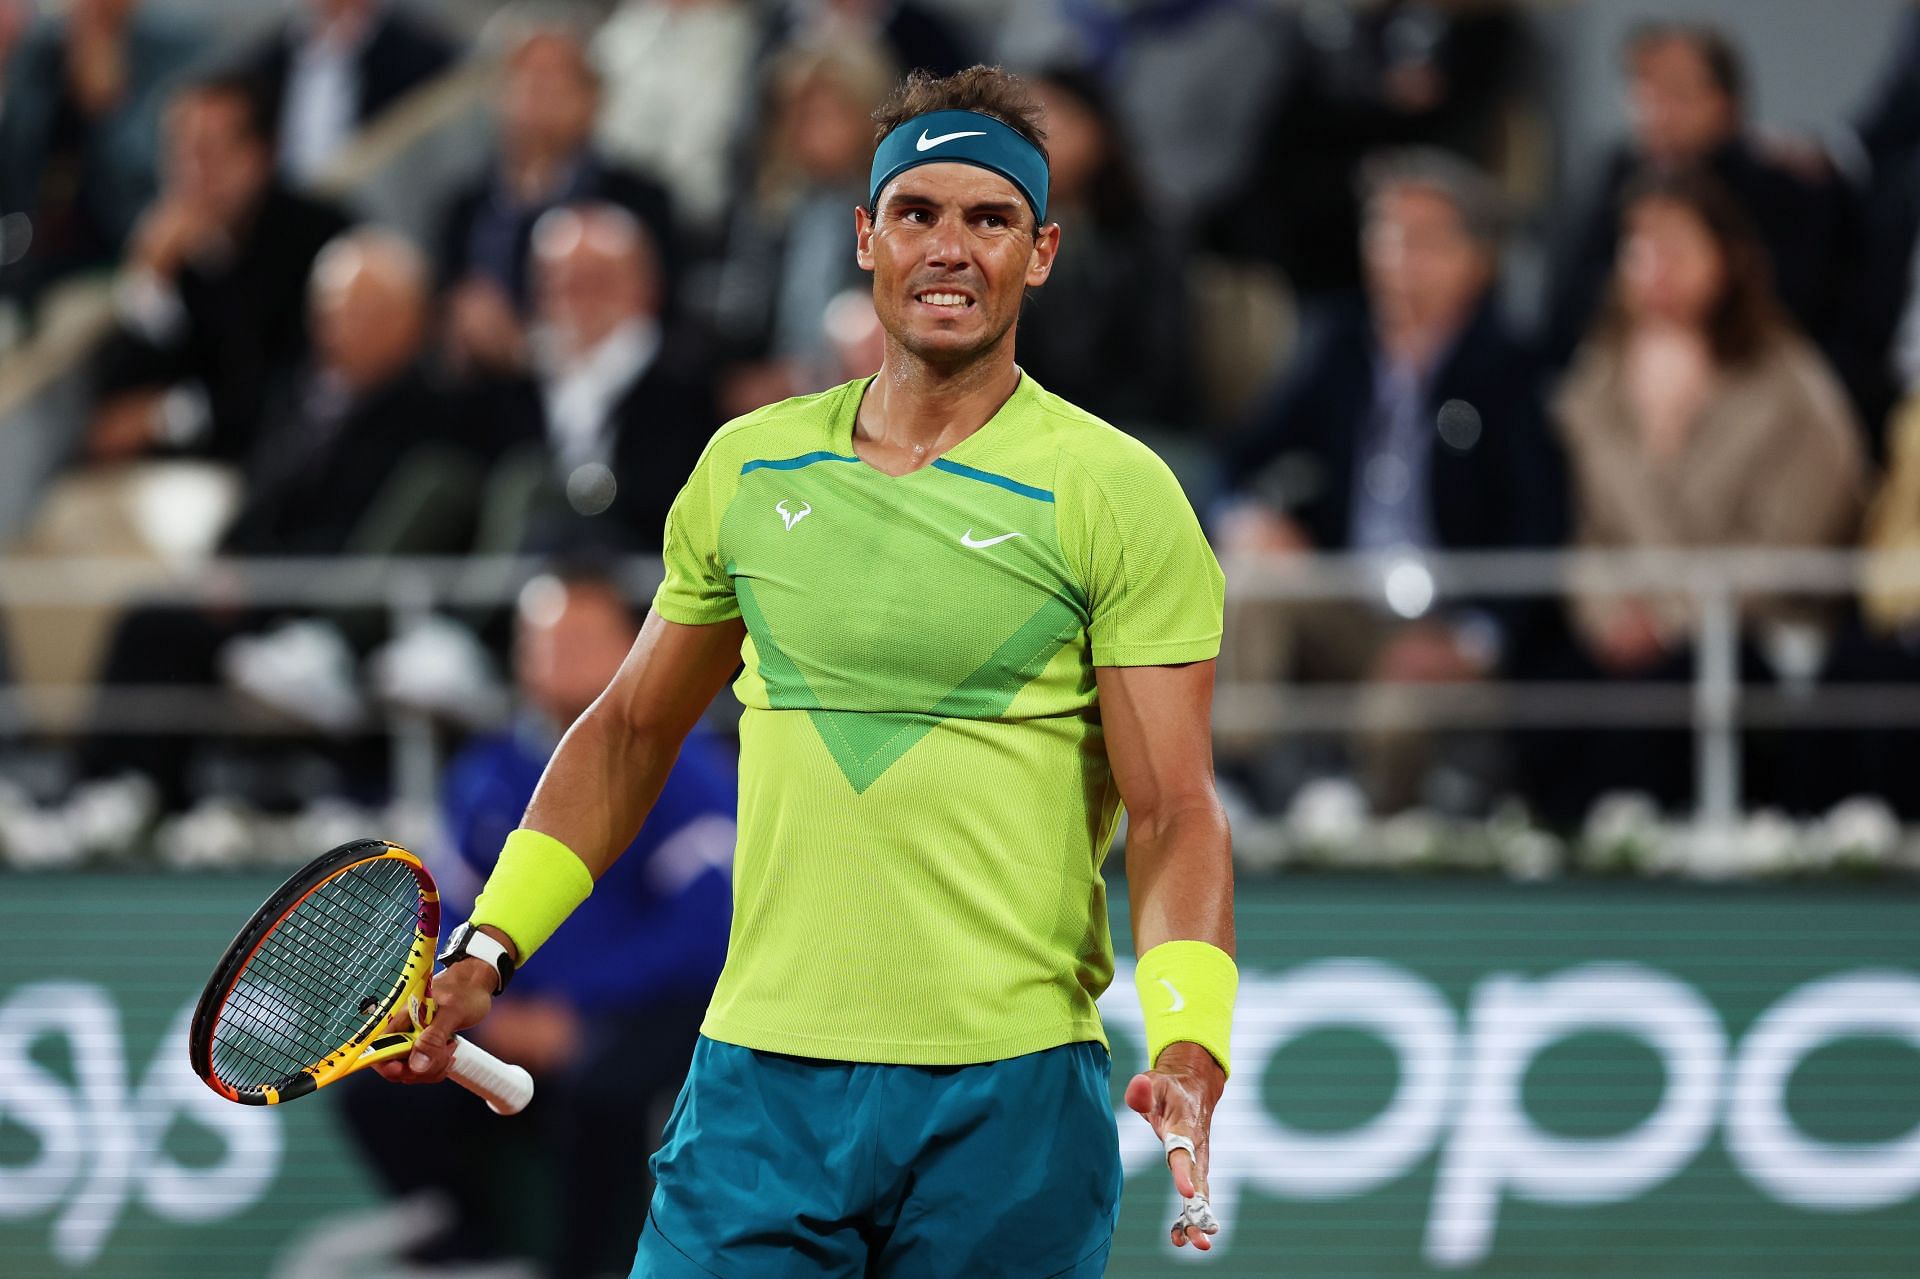 Rafael Nadal has a 6-1 win/loss record in matches played on his birthday